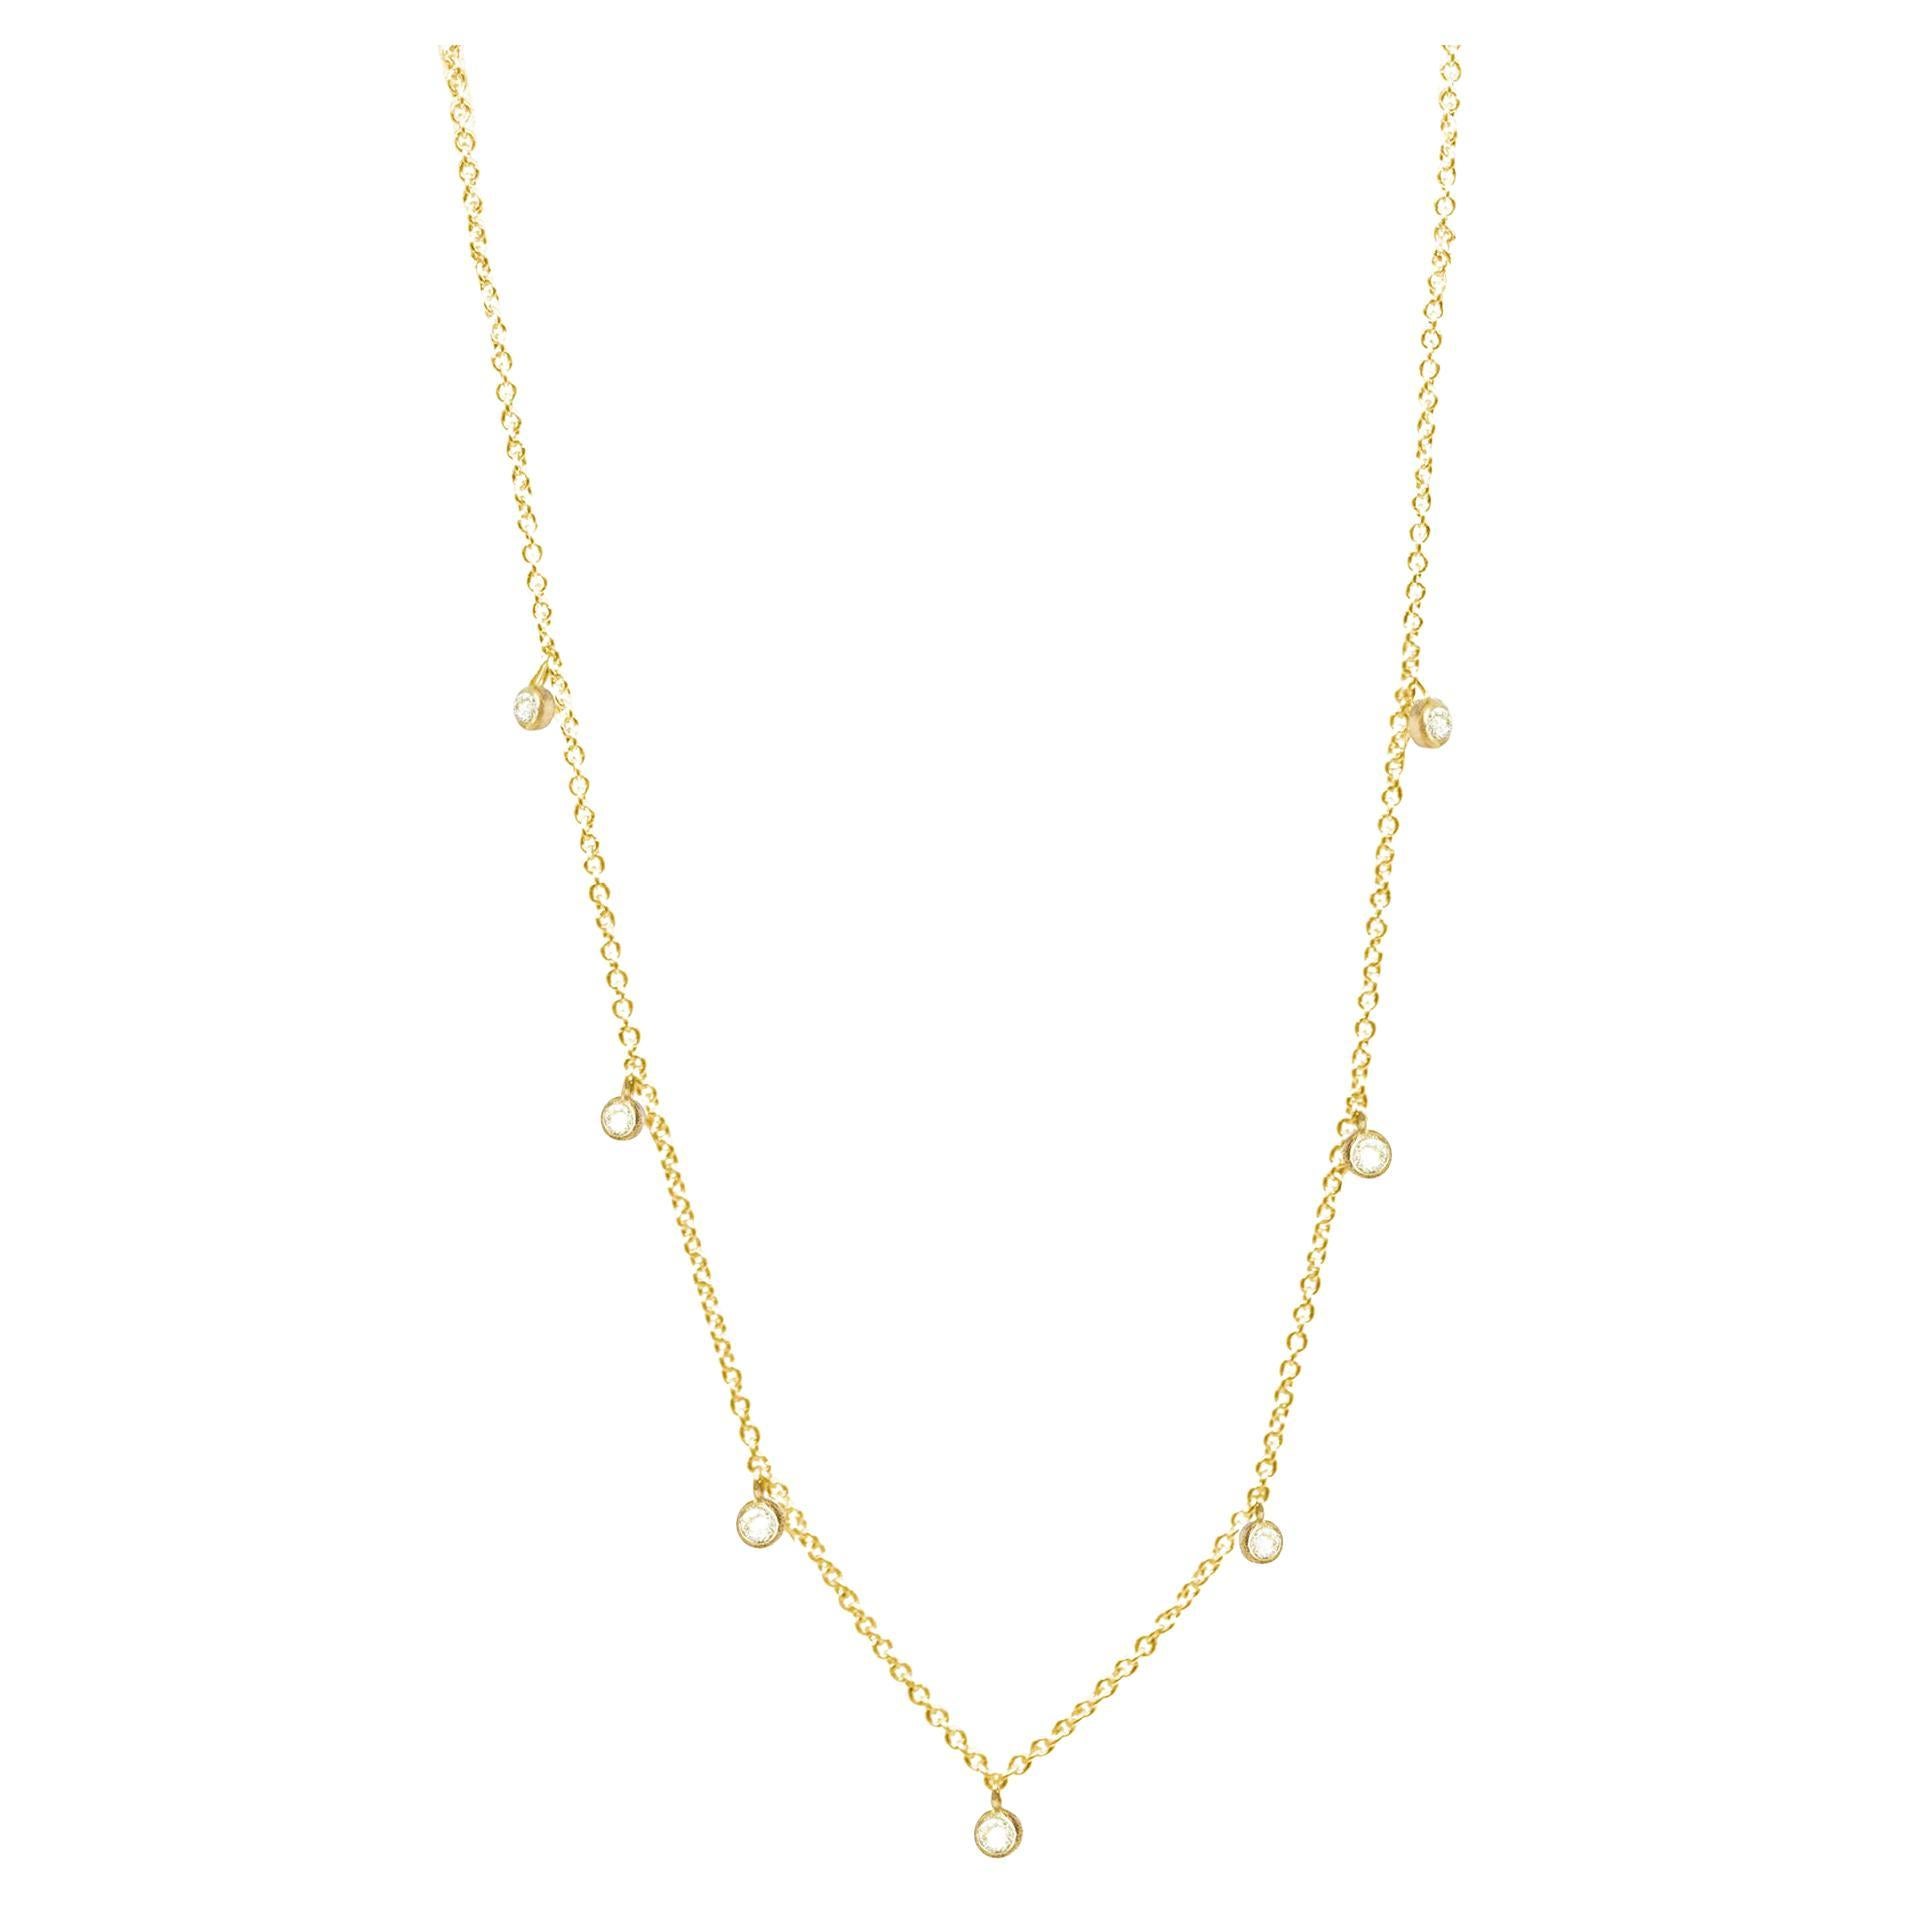 Forged Natural Diamond Gold 18k Necklace